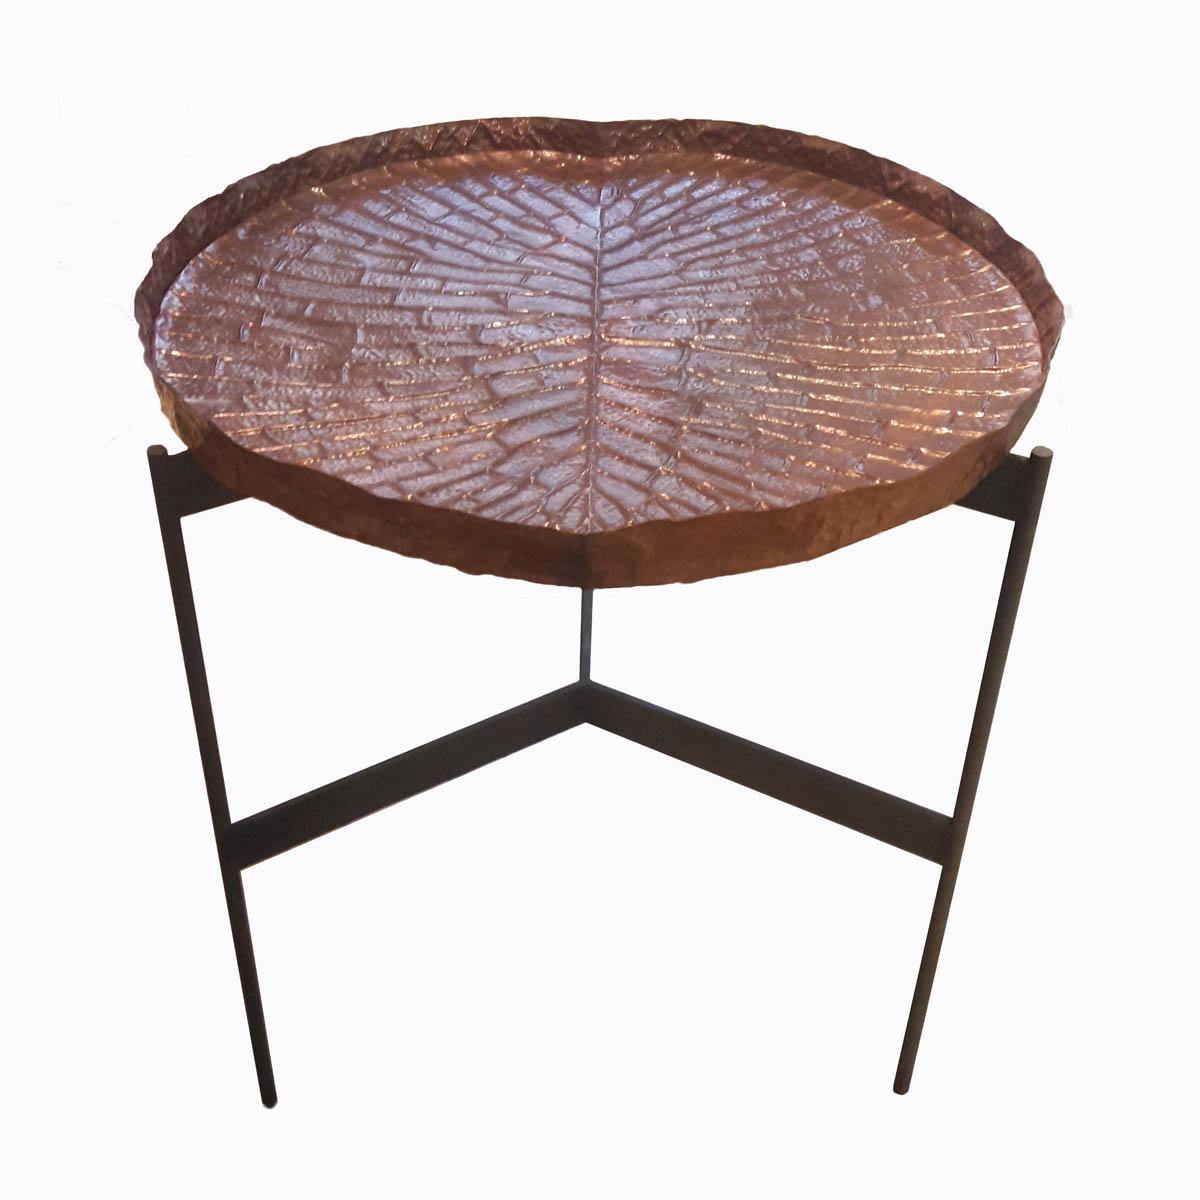 A high table with a repoussé copper tray resembling a lily leaf, on top of a wrought iron base. From Indonesia. Its unique looks and sleek, stylized lines make this original table an eye-catching addition for a porch, a patio, or any other space for